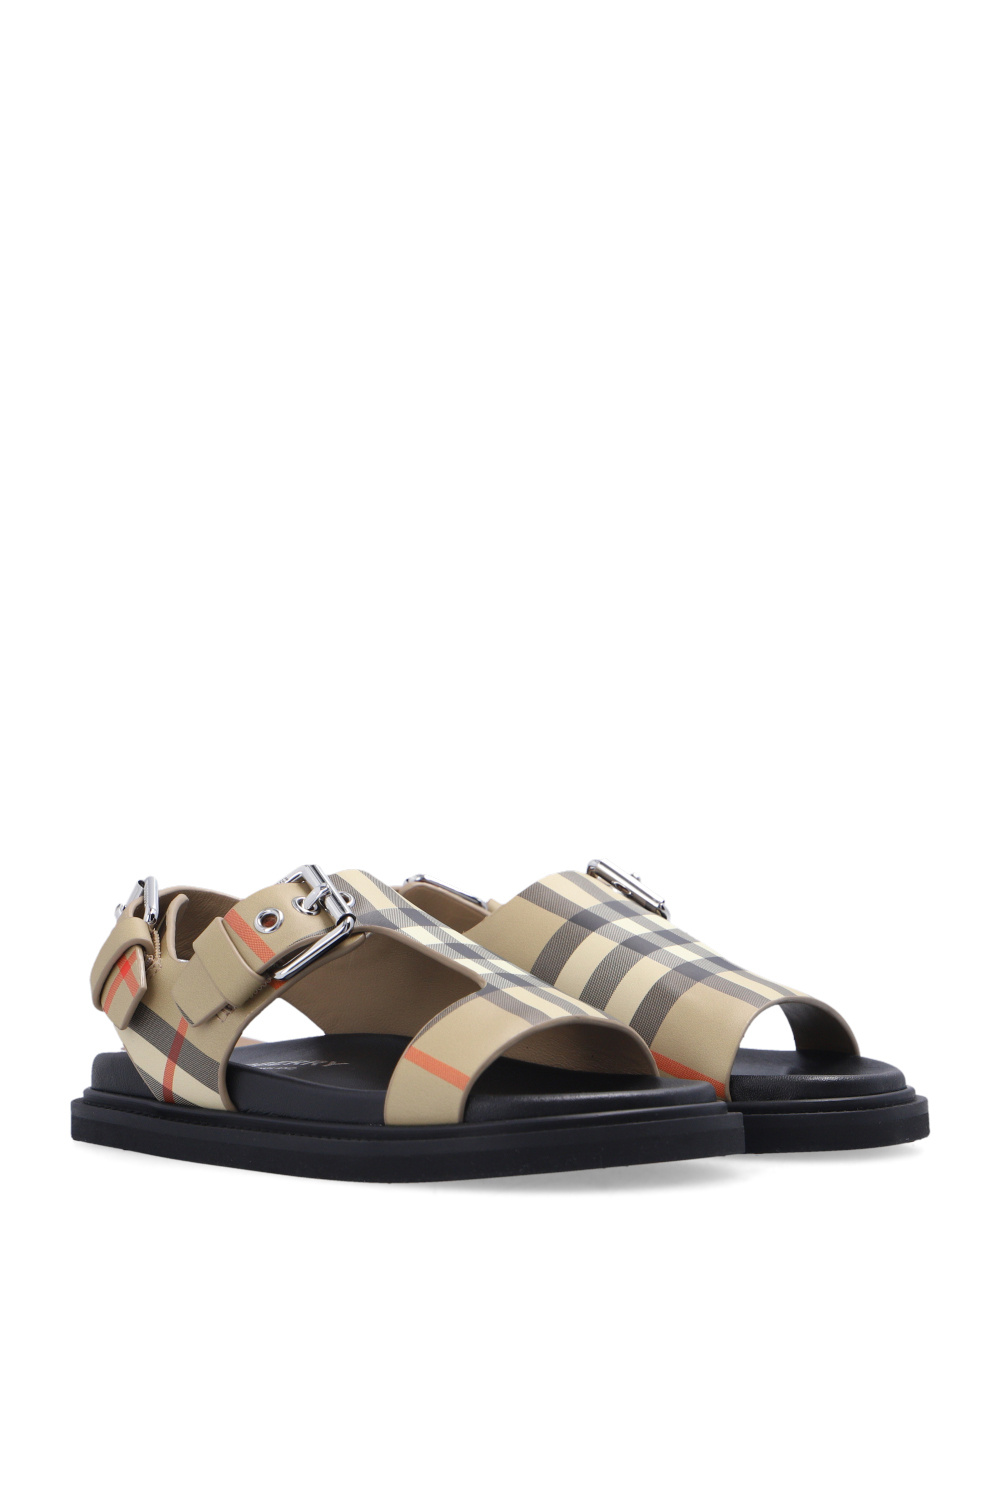 Burberry Kids TRACKed sandals